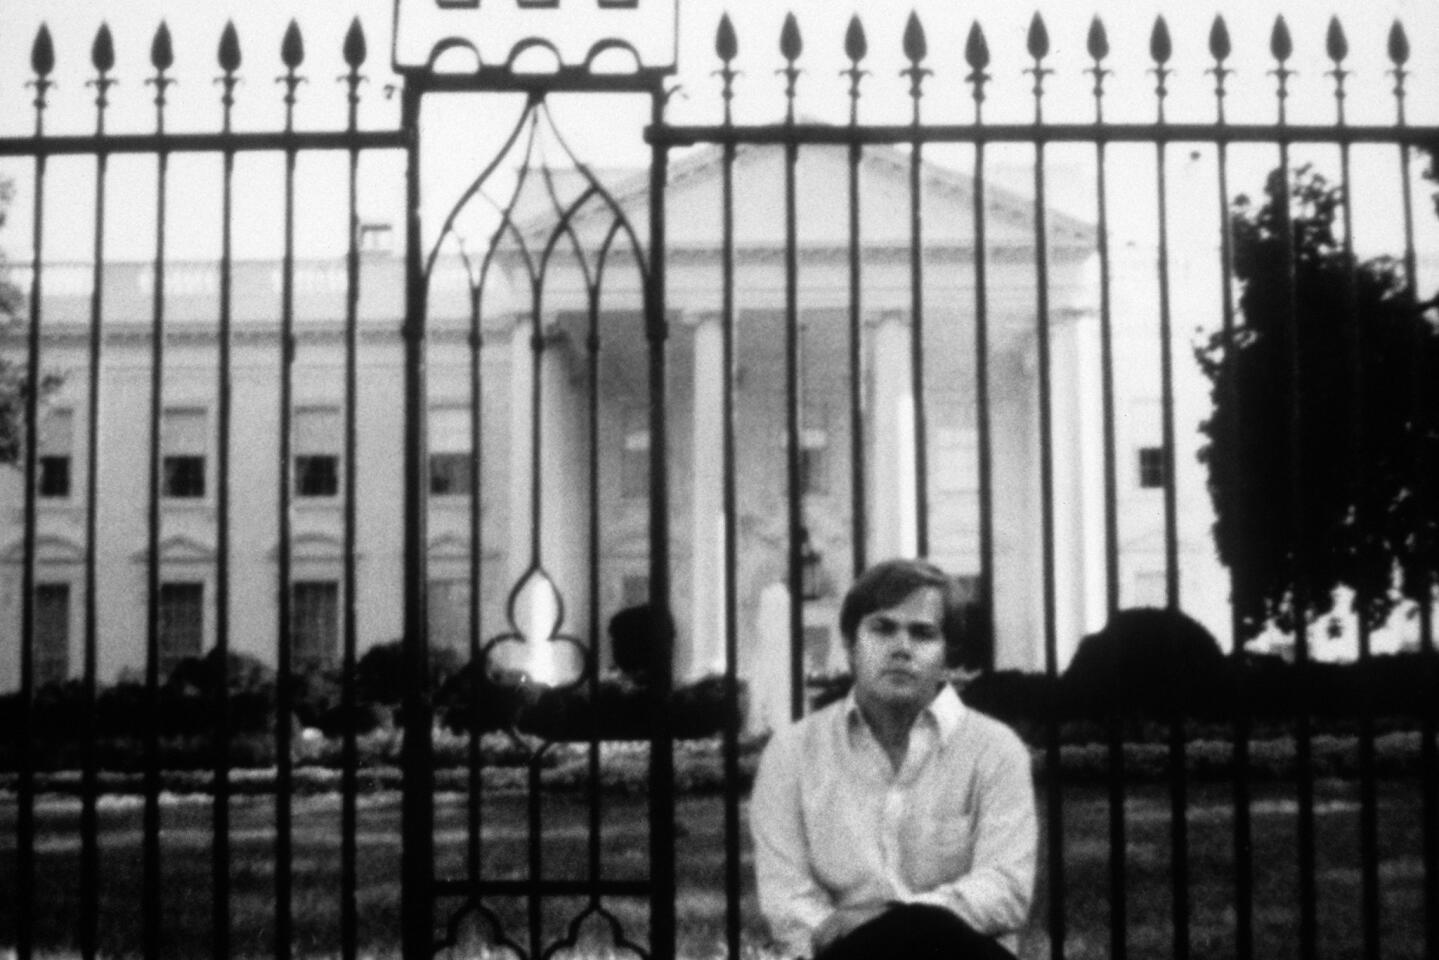 Picture taken in front of the White House of John Hinckley Jr., who attempted to assassinate President Reagan in Washington on March 30, 1981, as the culmination of an effort to impress actress Jodie Foster. He was found not guilty by reason of insanity and has remained under institutional psychiatric care since.